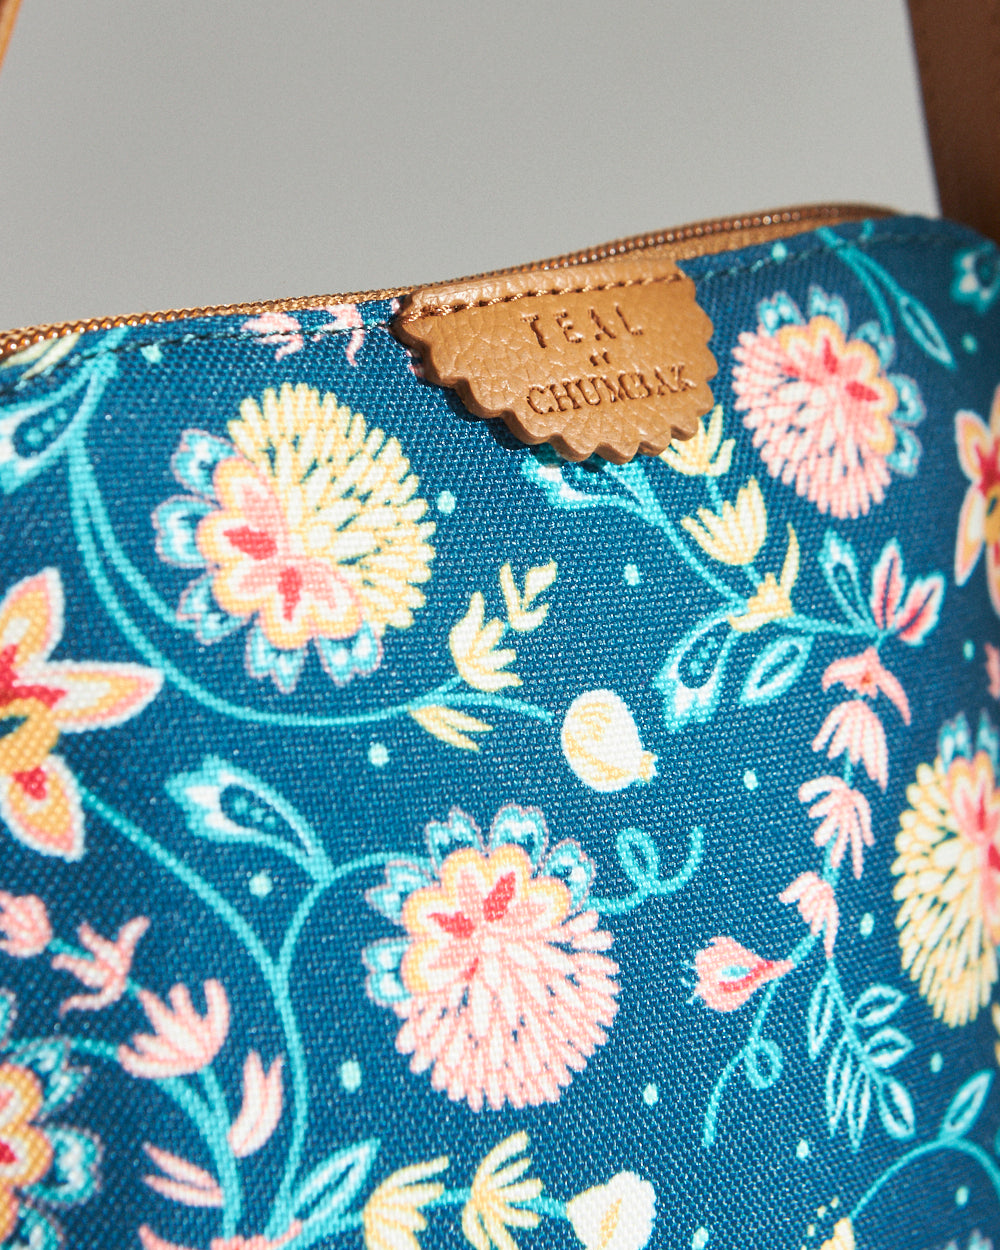 TEAL BY CHUMBAK Floral Structured Sling Bag